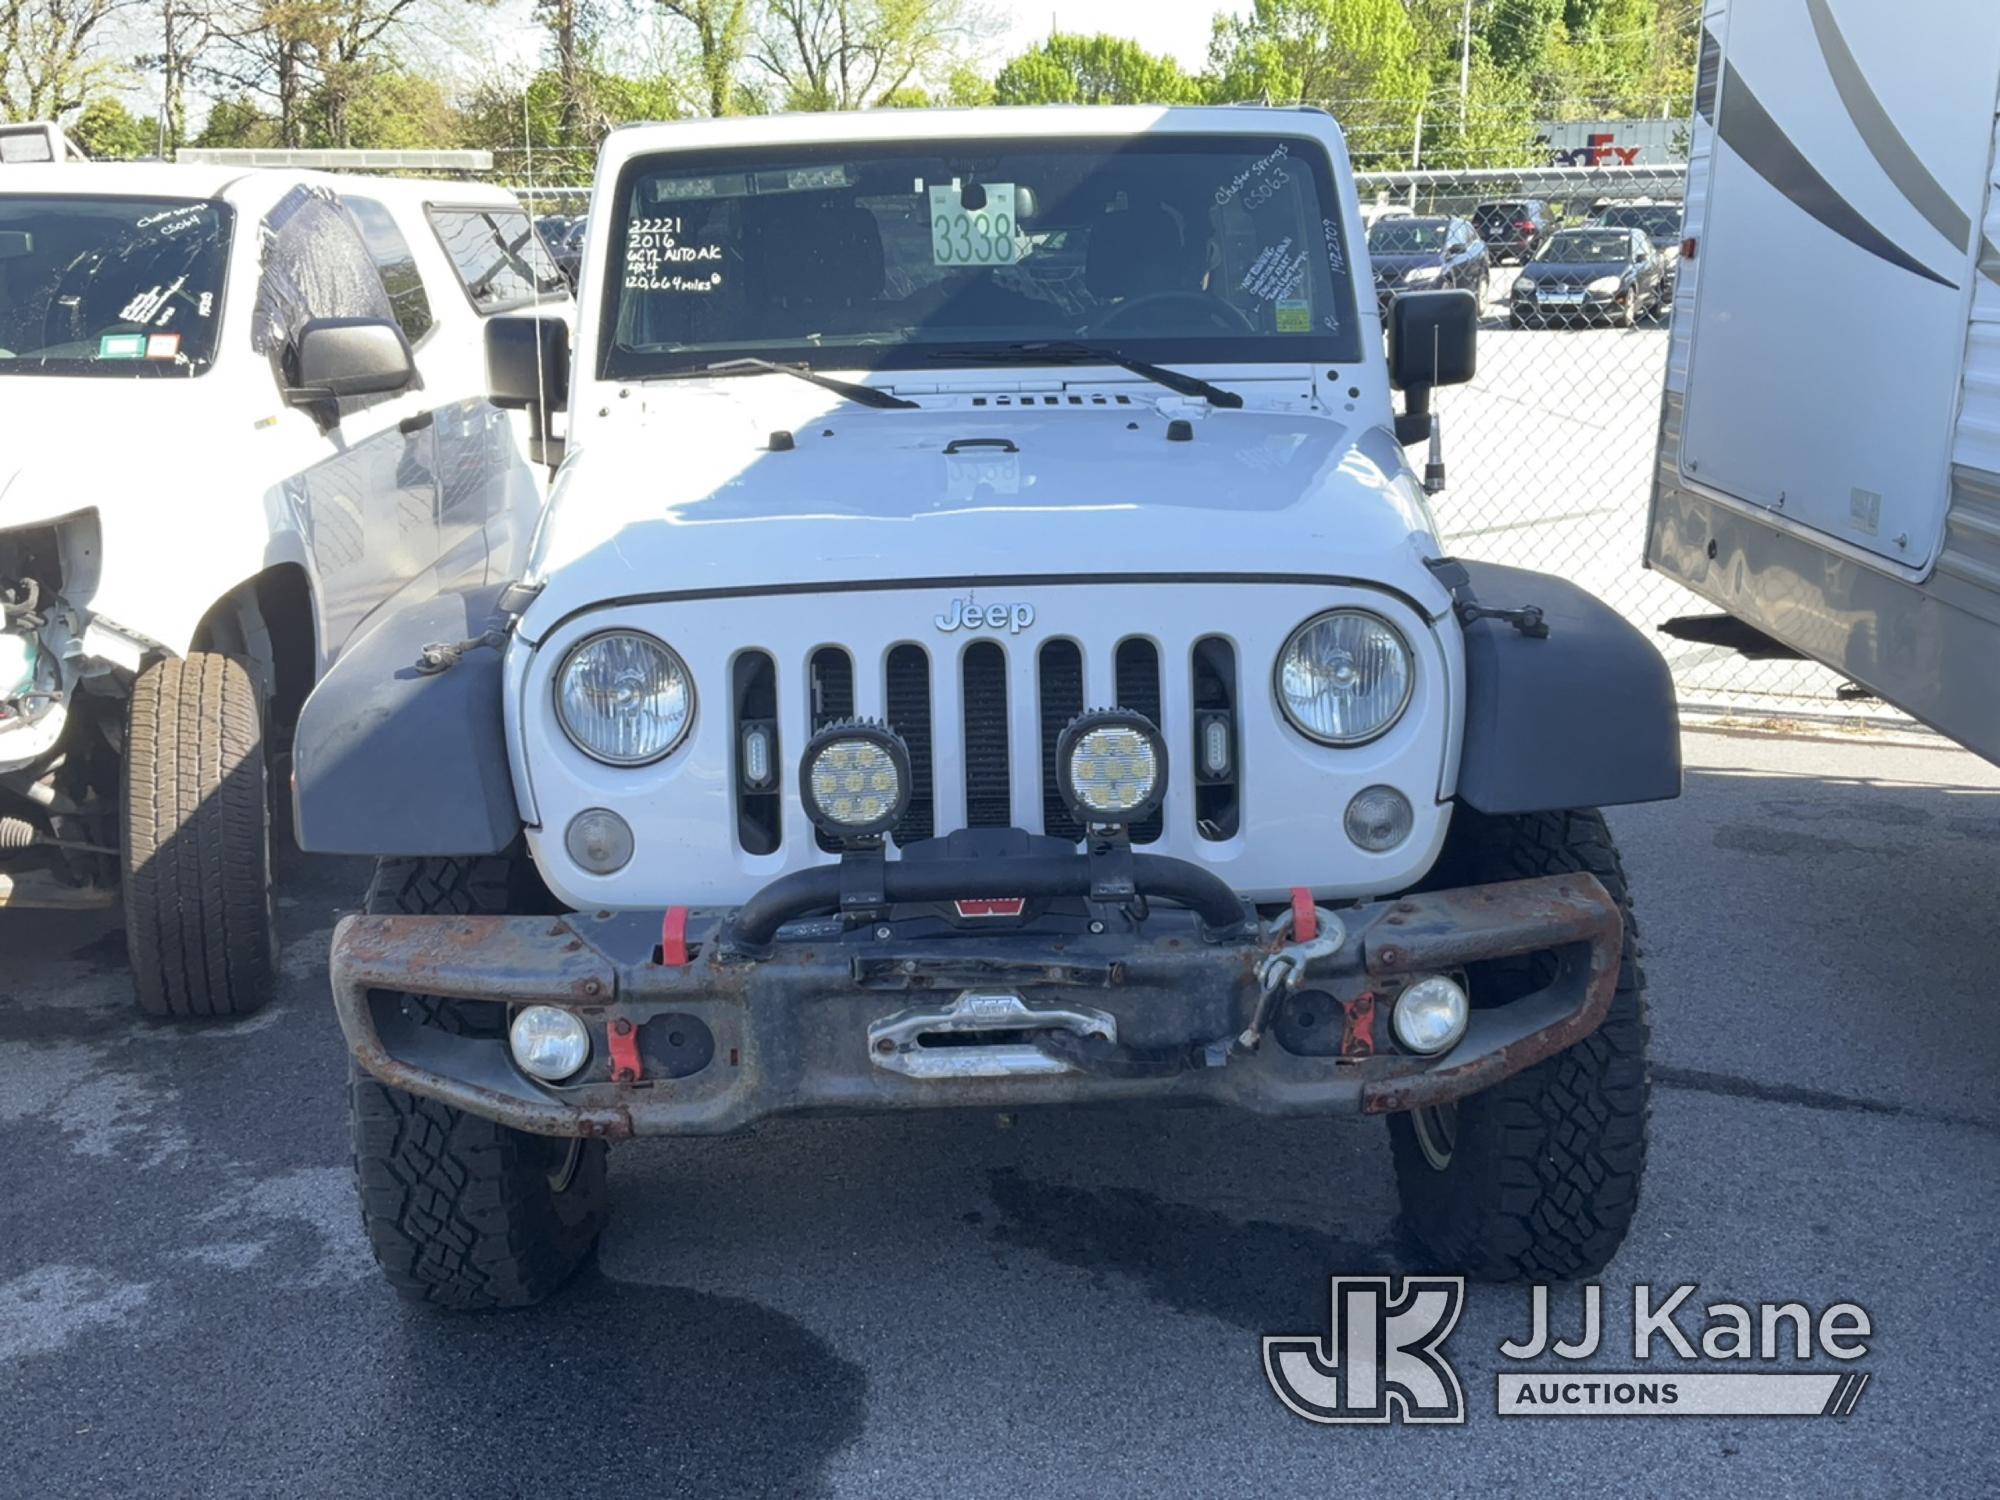 (Chester Springs, PA) 2016 Jeep Wrangler 4x4 4-Door Sport Utility Vehicle Former Security Vehicle, N